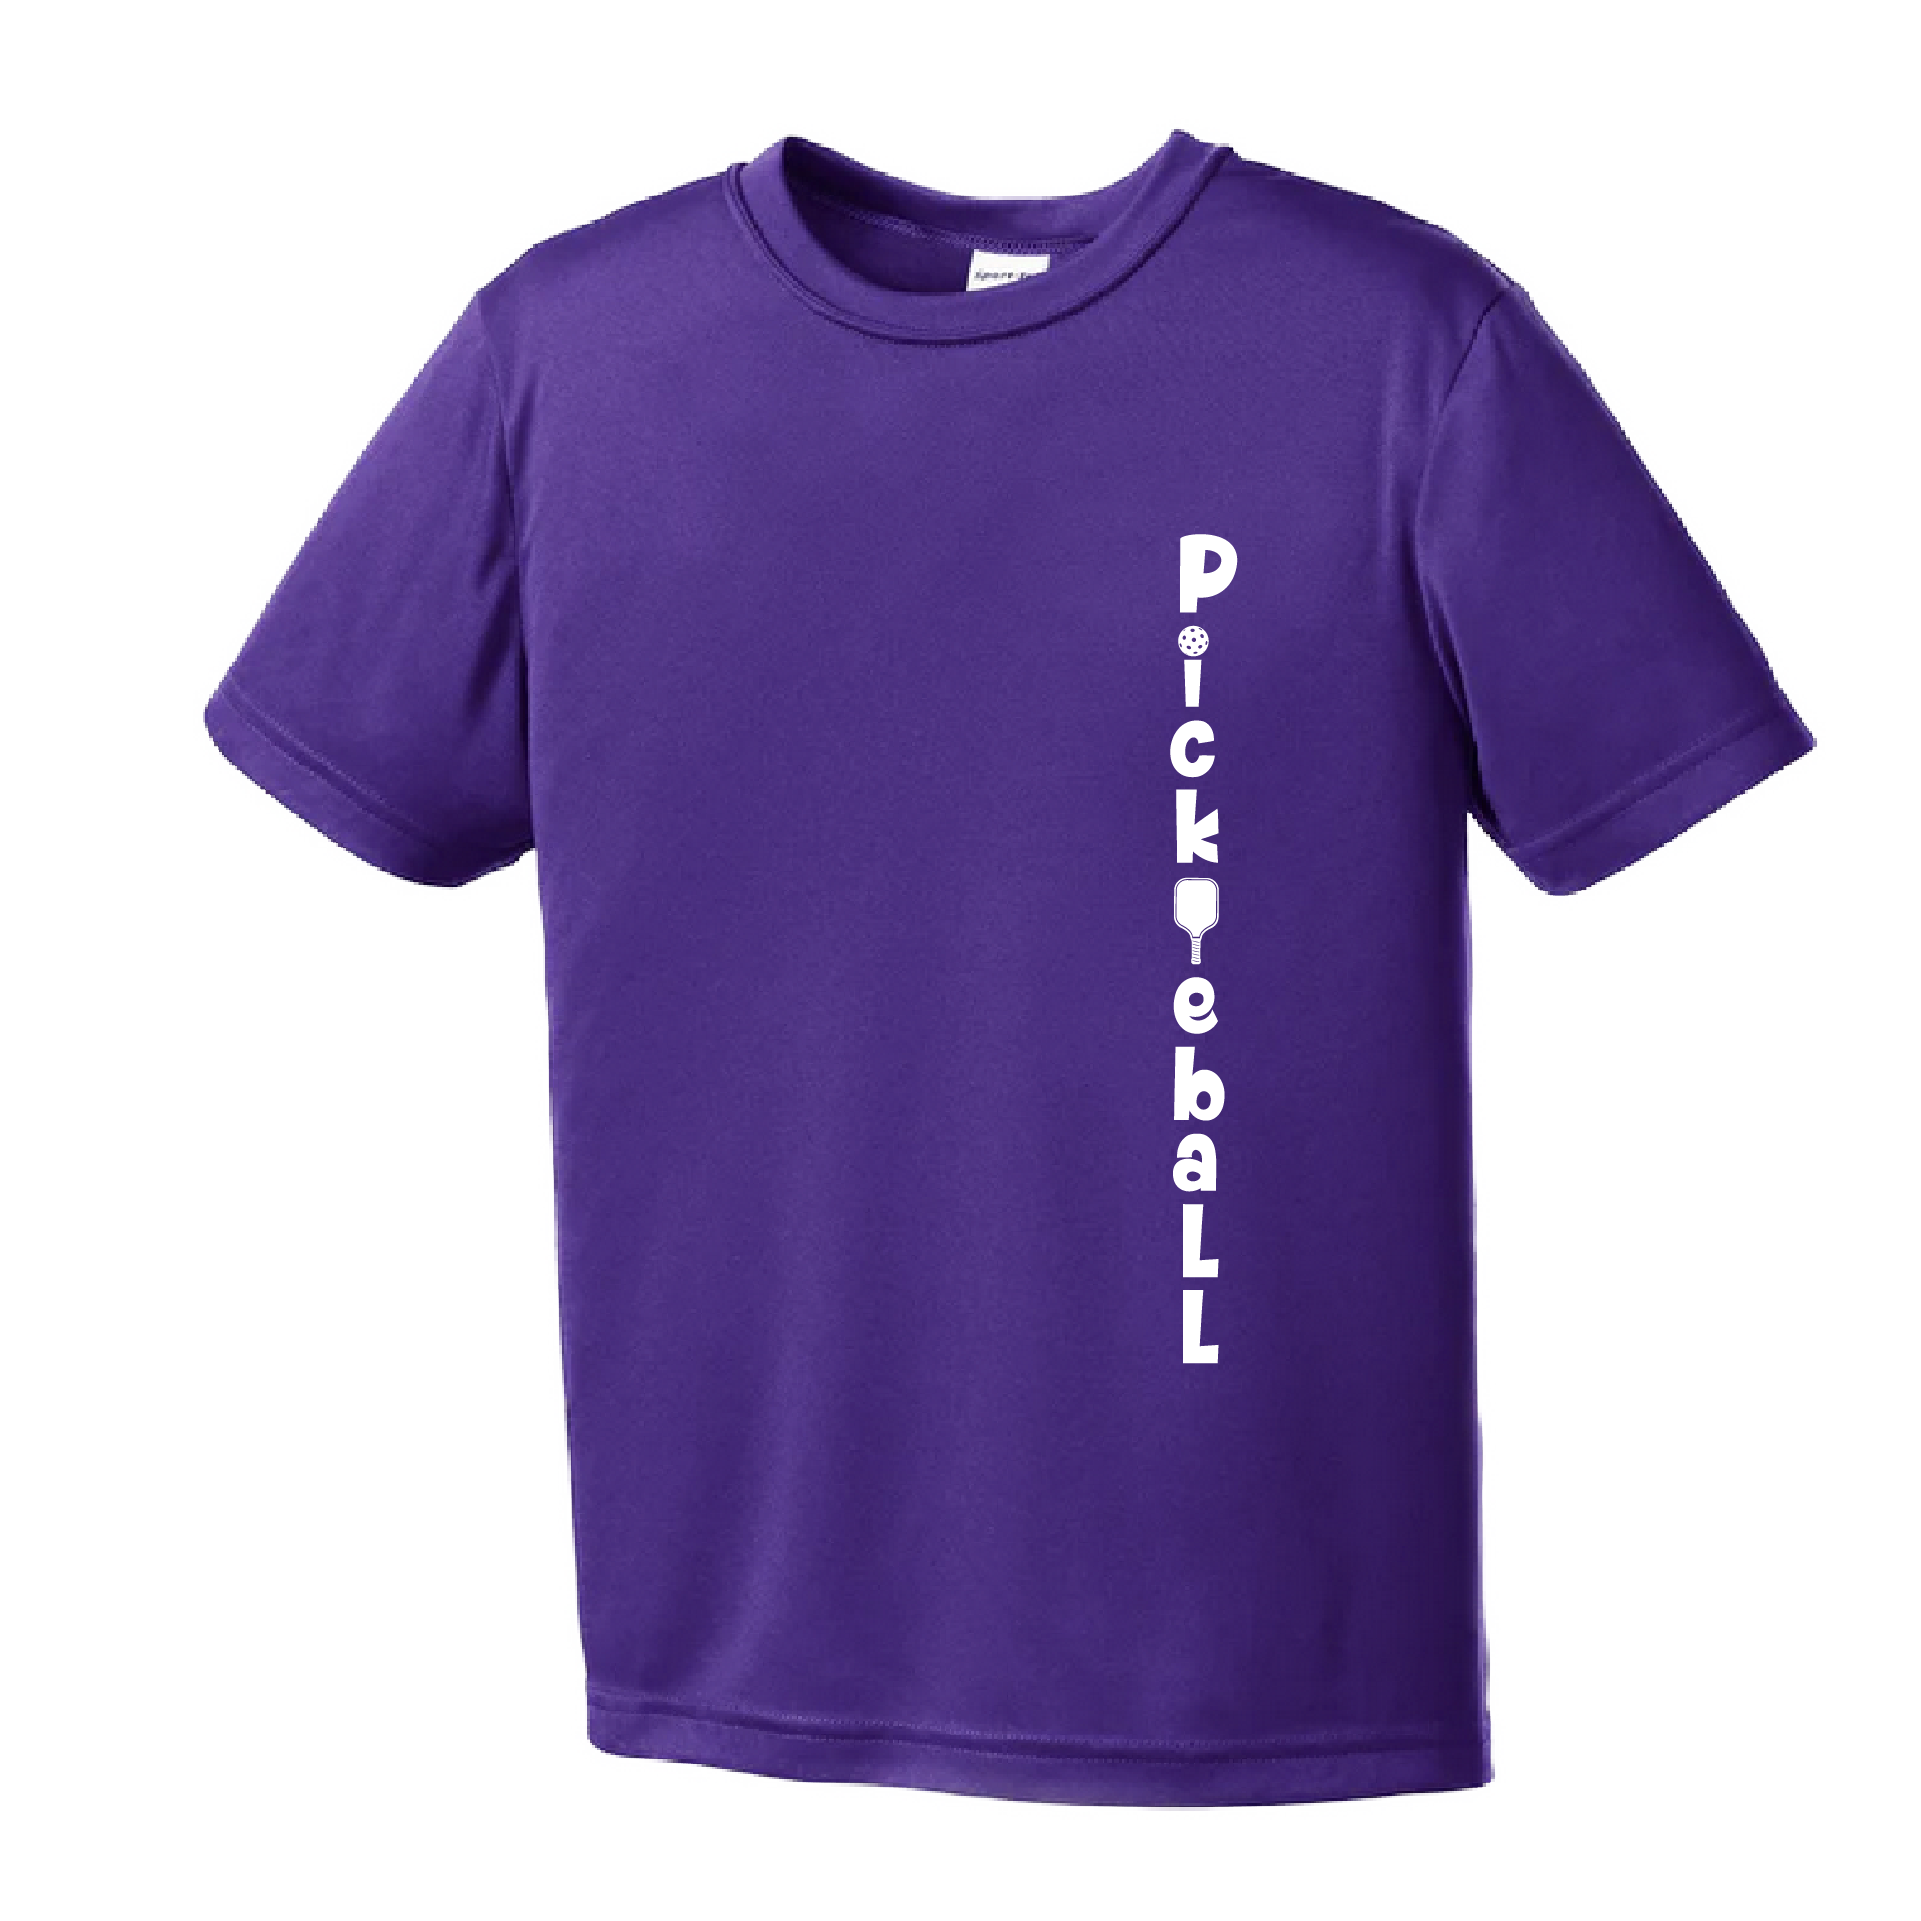 Pickleball Design: Pickleball Vertical - Customizable location  Youth Styles: Short Sleeve  Shirts are lightweight, roomy and highly breathable. These moisture-wicking shirts are designed for athletic performance. They feature PosiCharge technology to lock in color and prevent logos from fading. Removable tag and set-in sleeves for comfort.